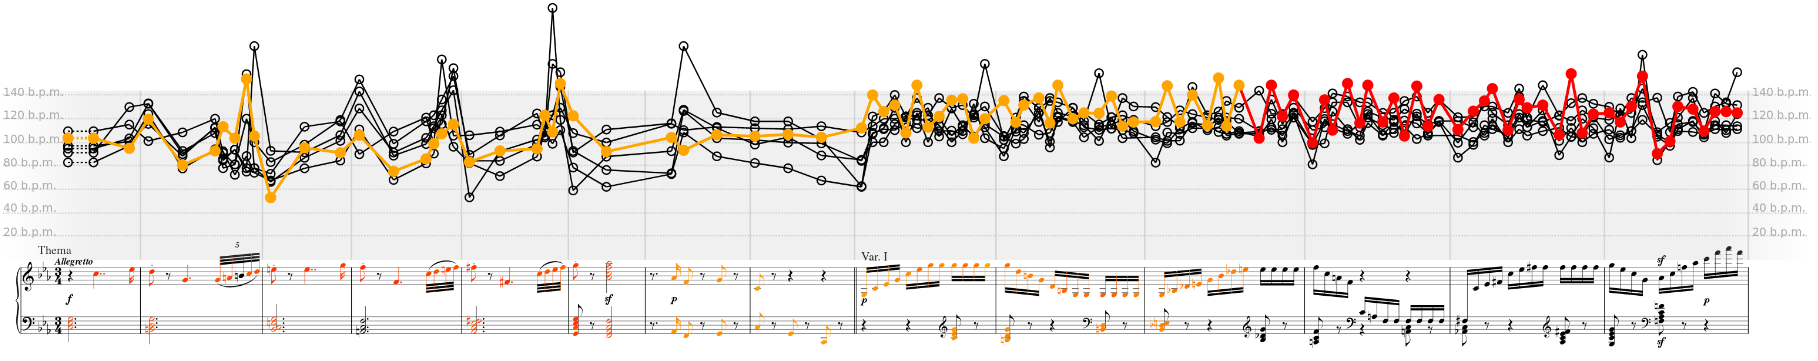 CLARA tempo visualisation of six pianists' performances of Beethoven's 32 Variations in c minor (WoO 80)